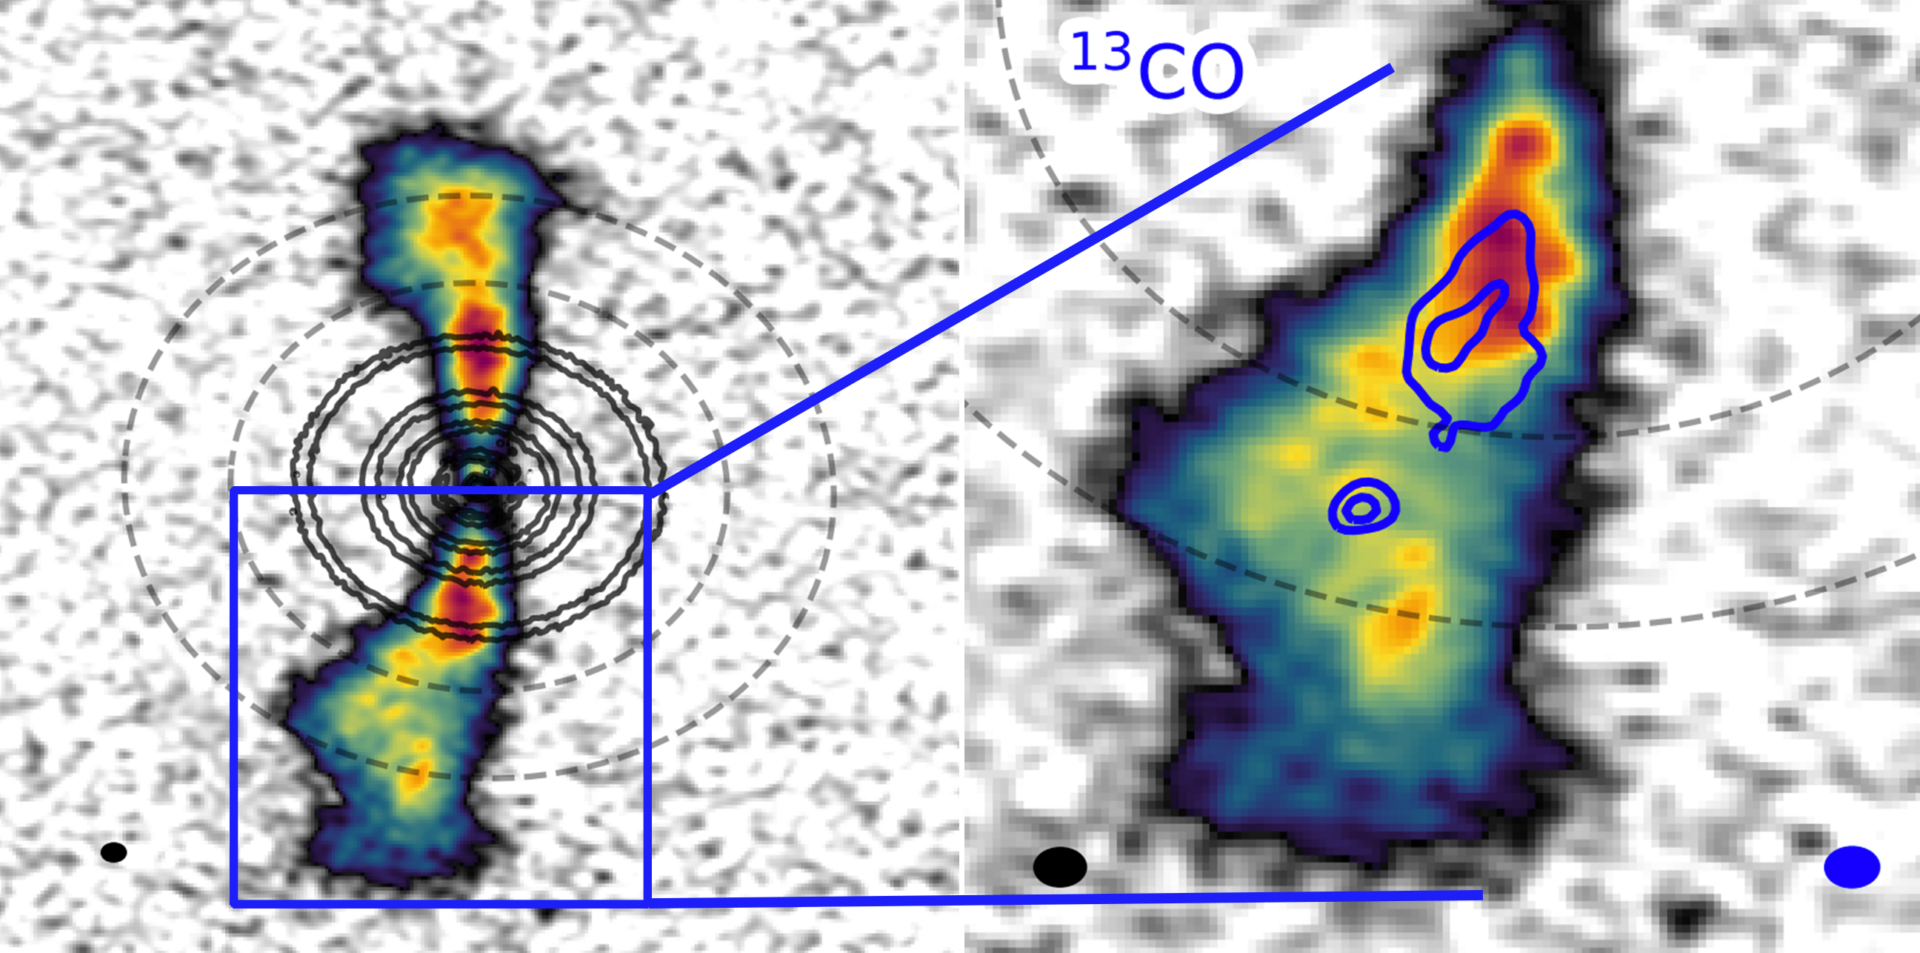 <p>Scientists studying the young star AS 209 have detected gas in a circumplanetary disk for the first time, which suggests the star system may be harboring a very young Jupiter-mass planet. Science images from the research show (right) blob-like emissions of light coming from otherwise empty gaps in the highly-structured, seven-ring disk (left). Credit: ALMA (ESO/NAOJ/NRAO), J. Bae (U. Florida)</p>
